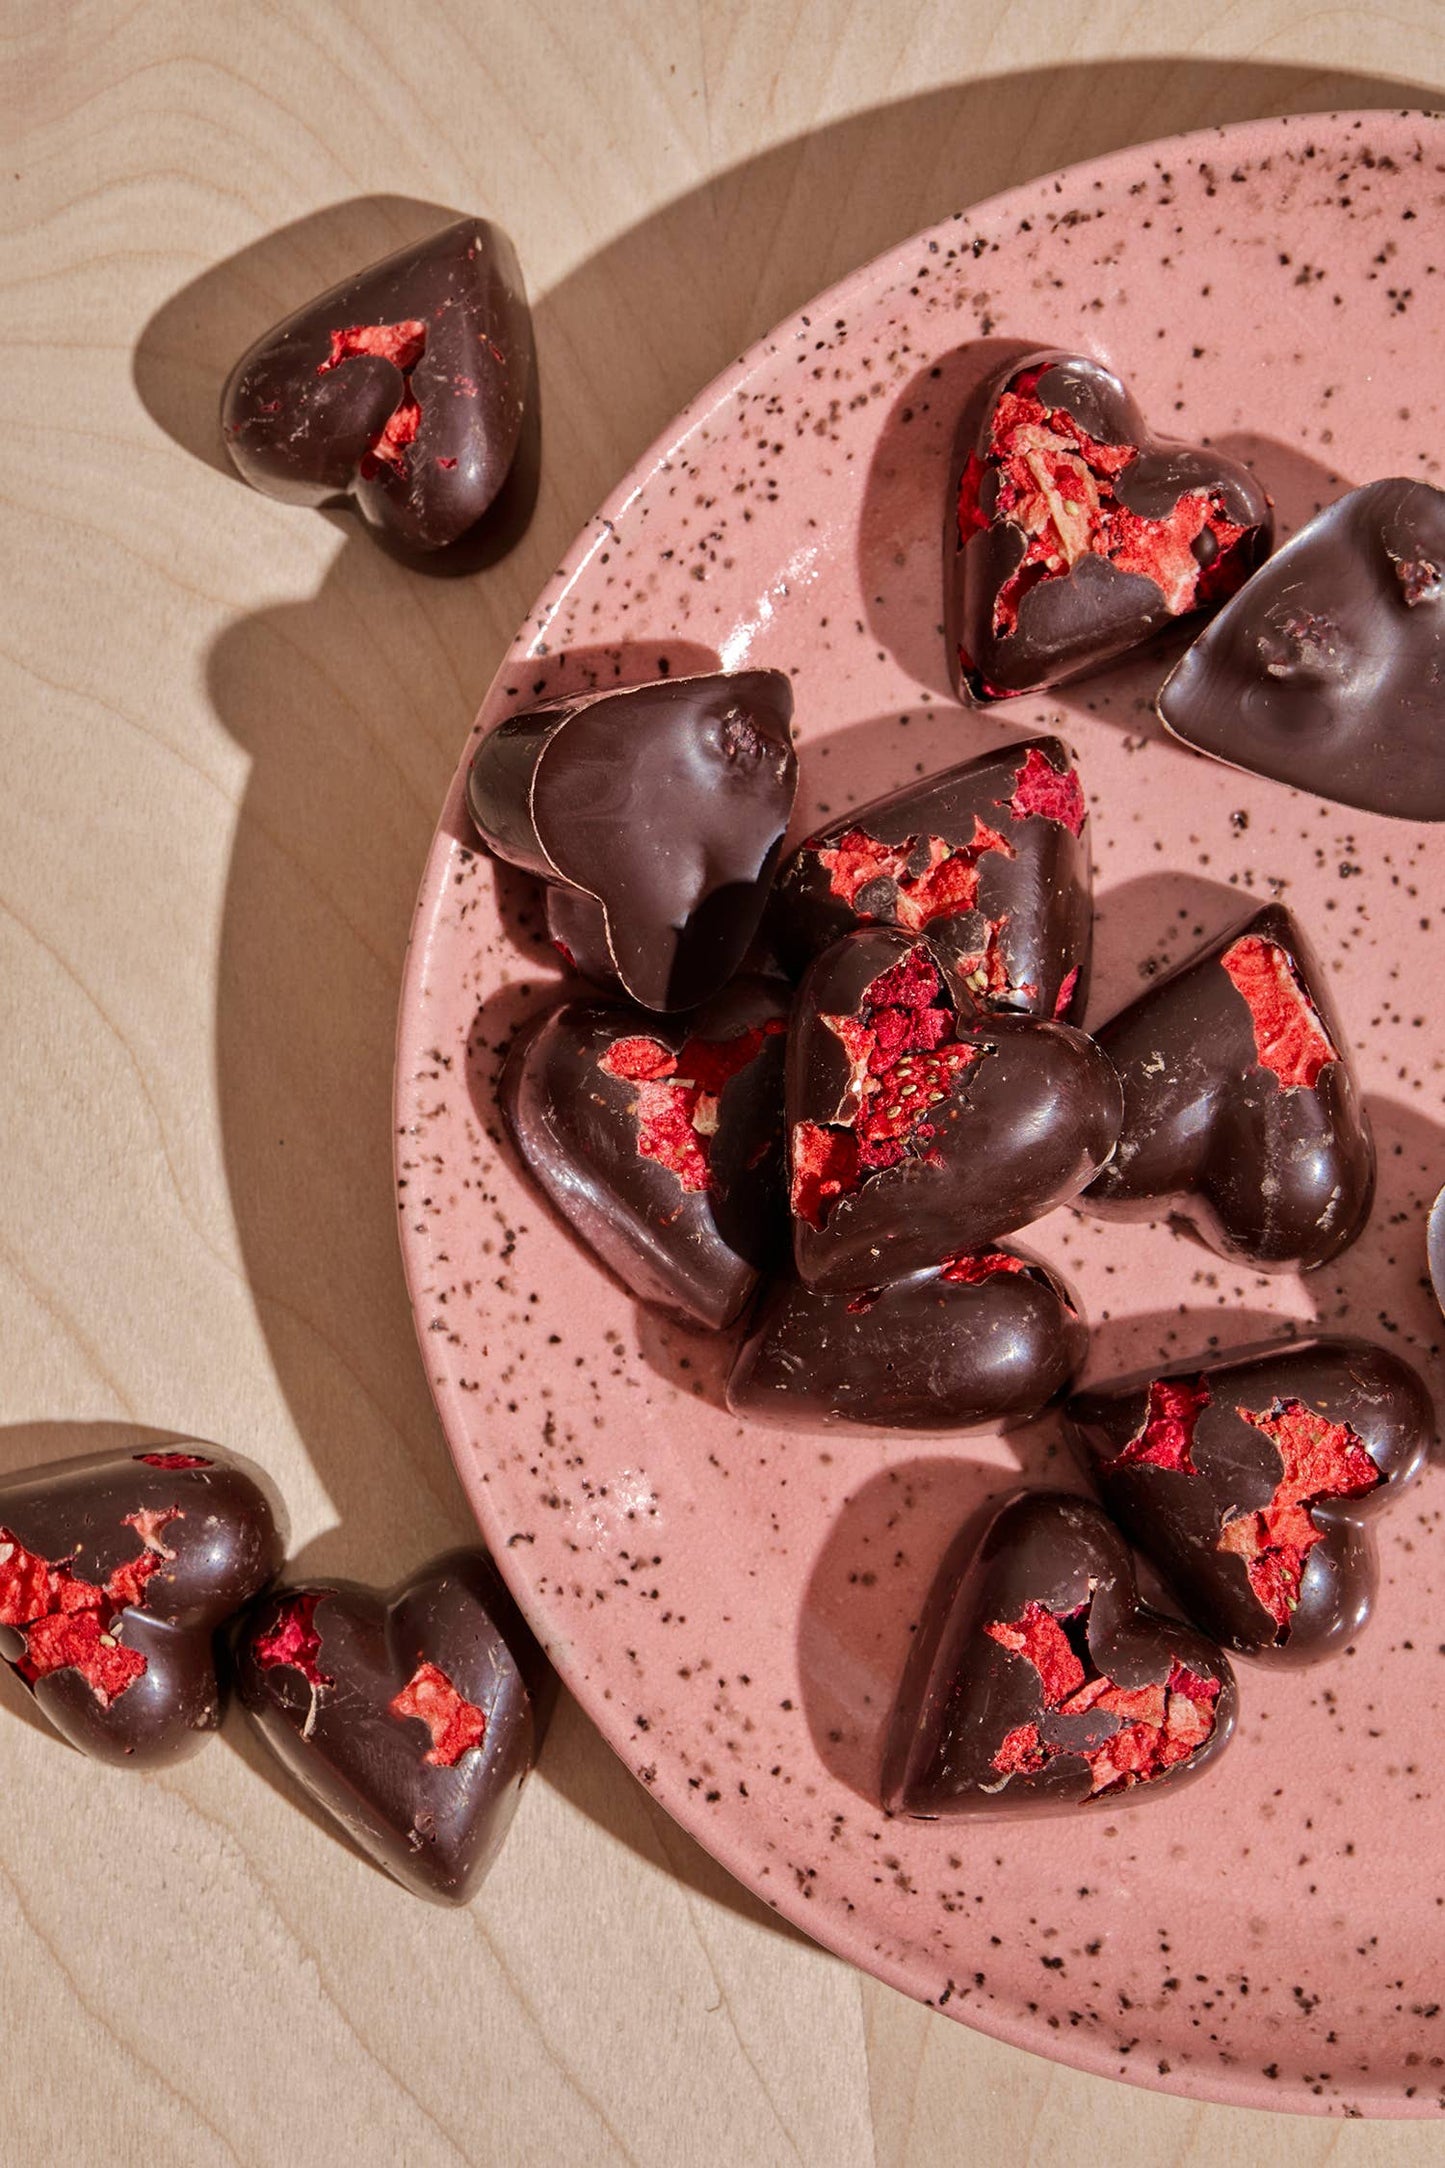 Wildwood Chocolate - Berry Berry Hearts for Valentine's Day